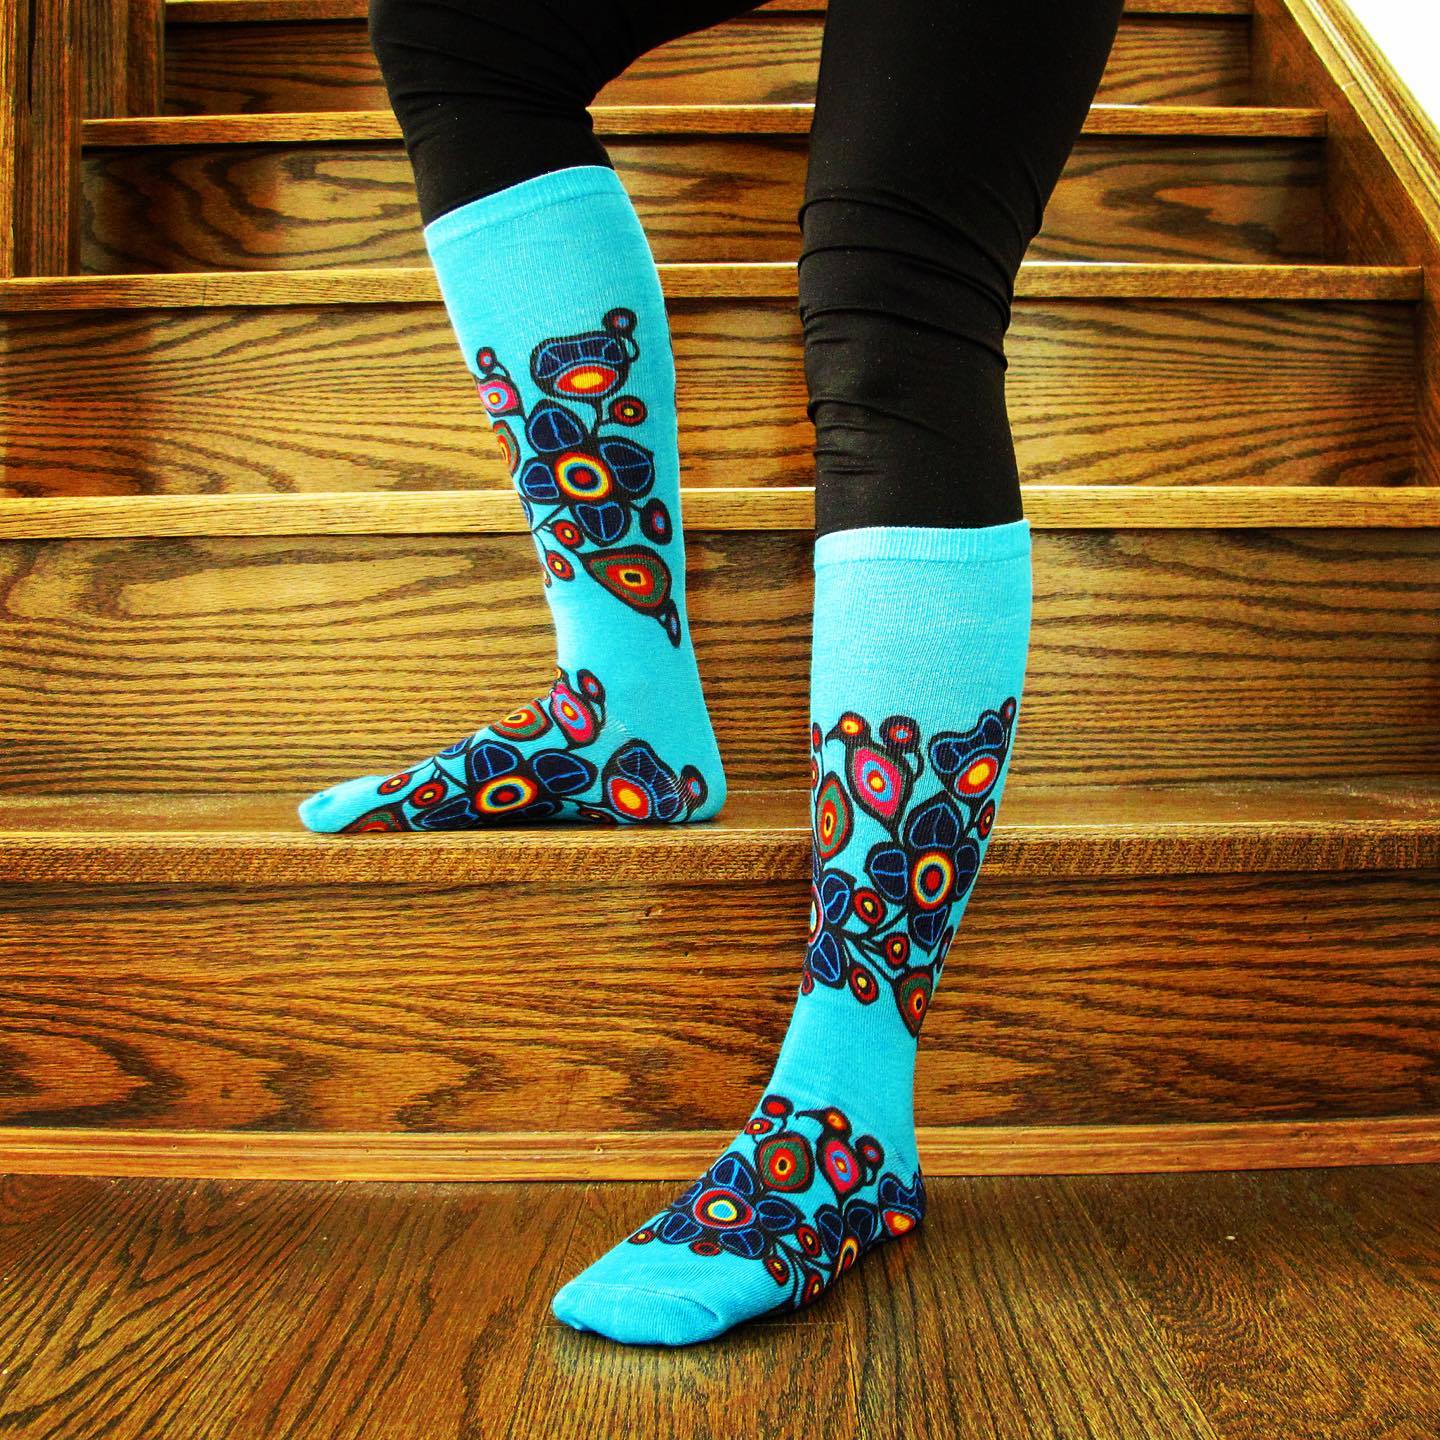 Norval Morrisseau Flowers and Birds Art Socks - Size ML Out of Stock